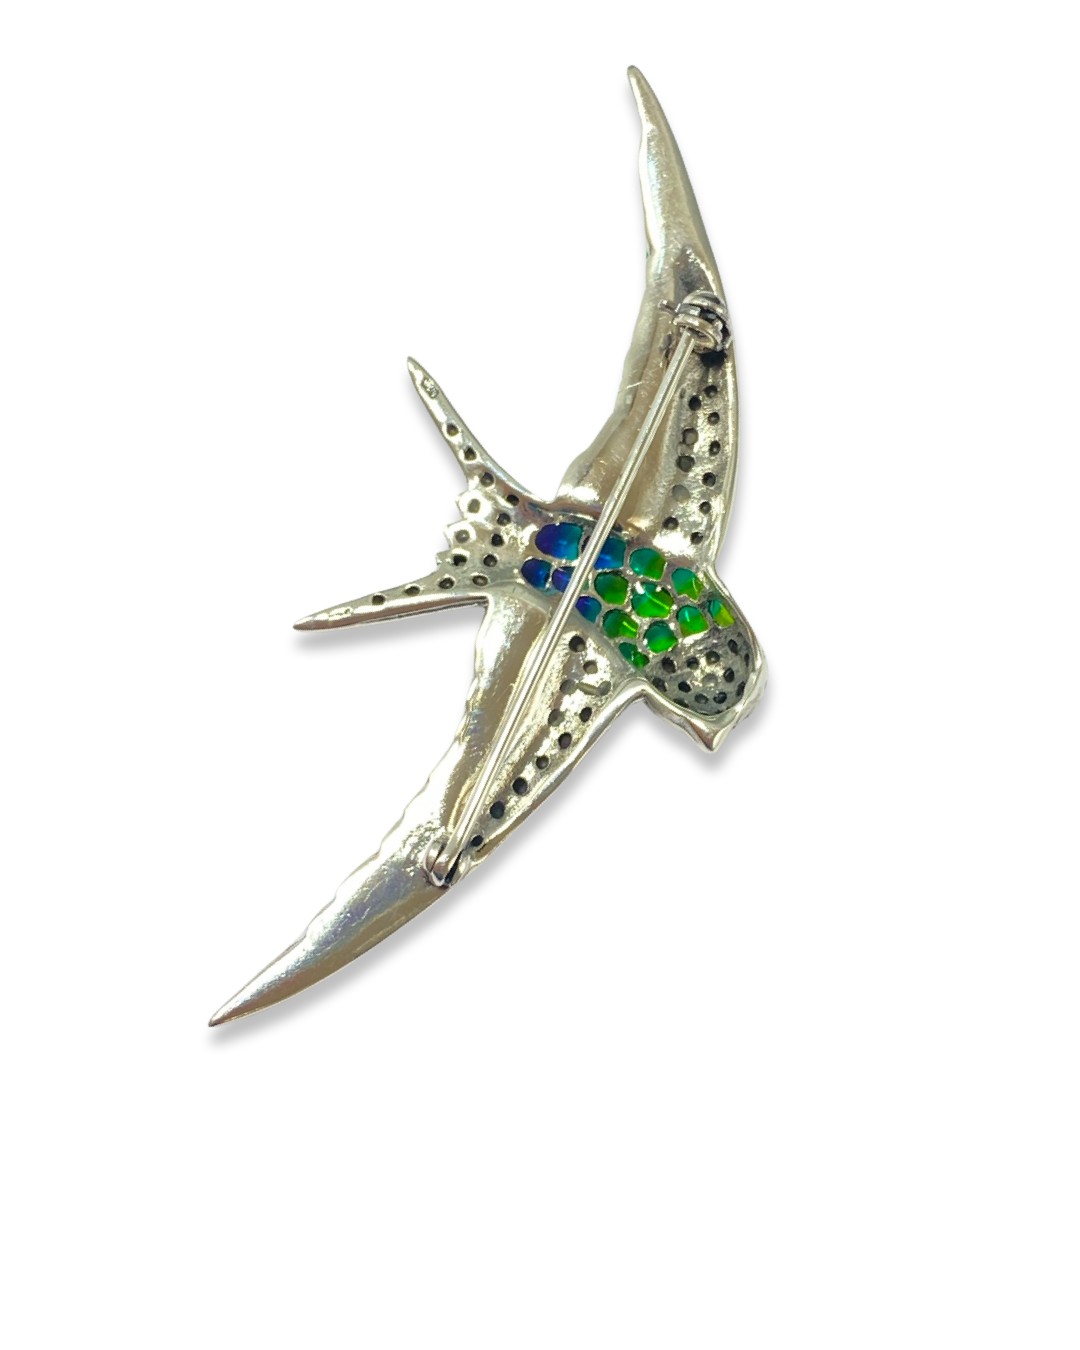 Silver, Plique a Jour and marcasite bird brooch weighing 7.87 grams, measuring 3cm in length and 7cm - Image 2 of 2